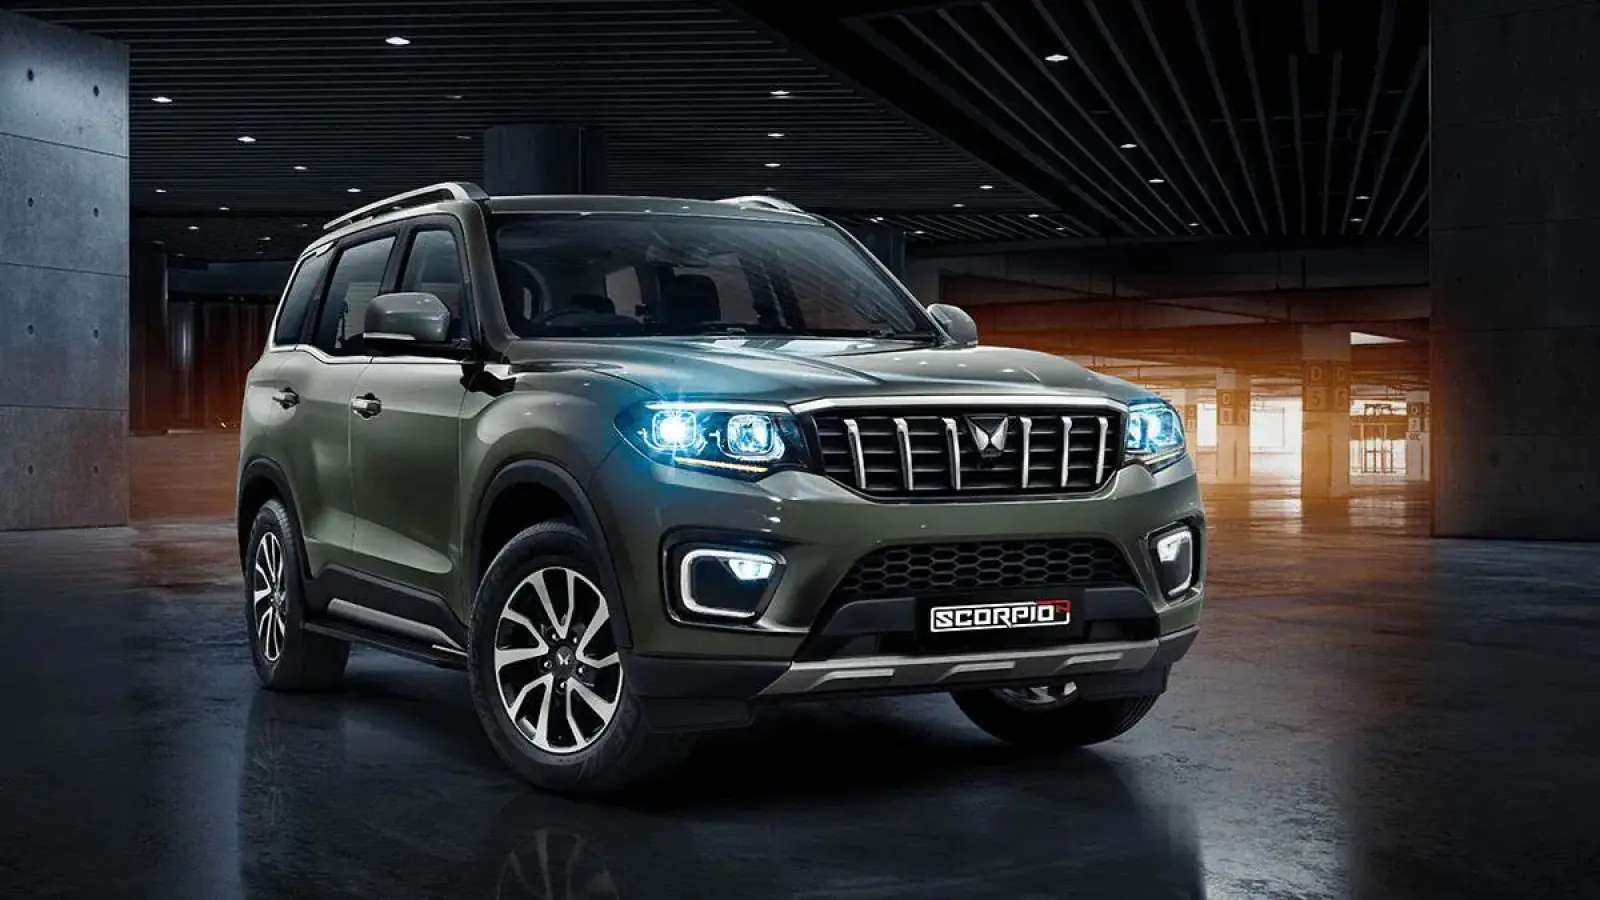 Mahindra's powerful SUV Scorpio N is now even better, the company has introduced new features, know the full details